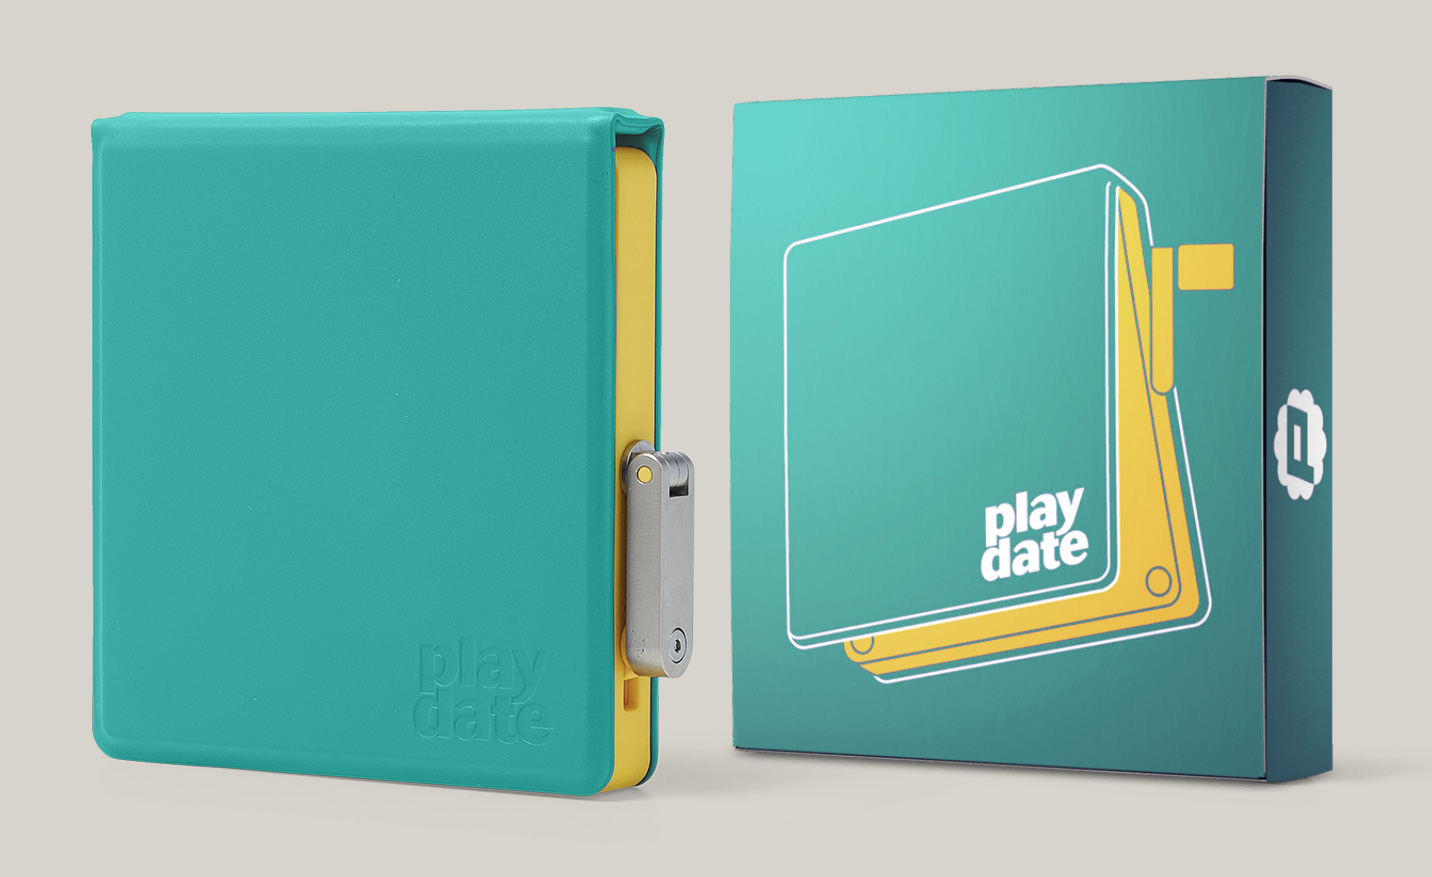 Introducing a refreshing new Playdate Cover color: Aqua - Playdate 